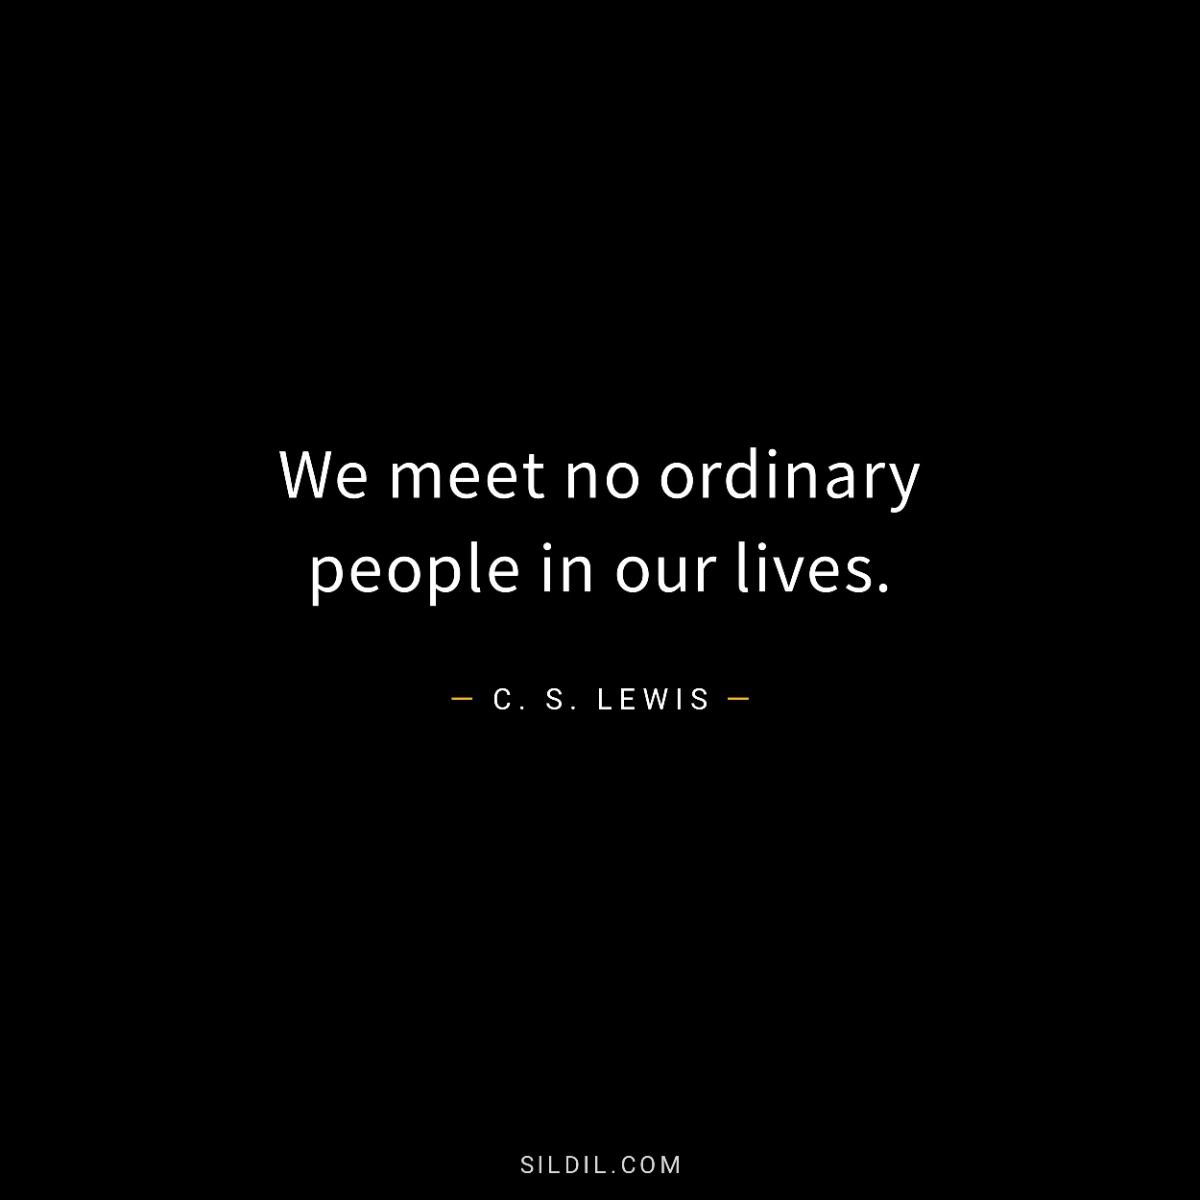 We meet no ordinary people in our lives.